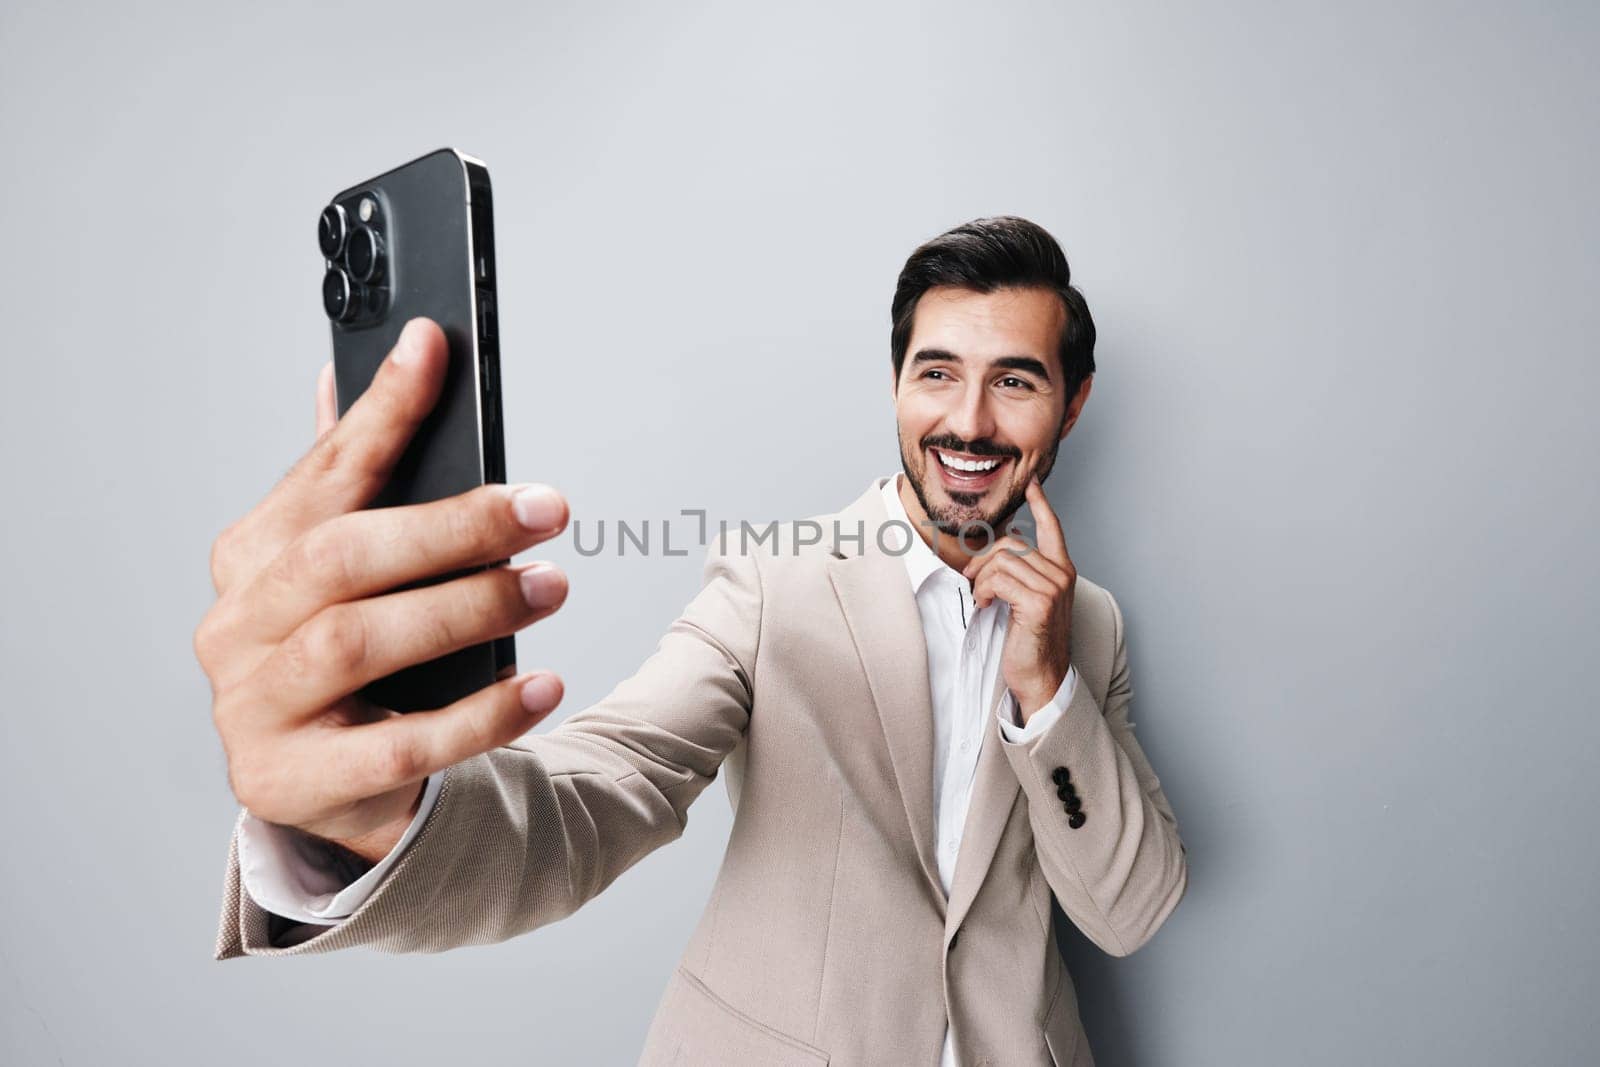 man phone businessman business happy young cell white smile guy connection call confident portrait male hold suit smartphone phone entrepreneur mobile isolated